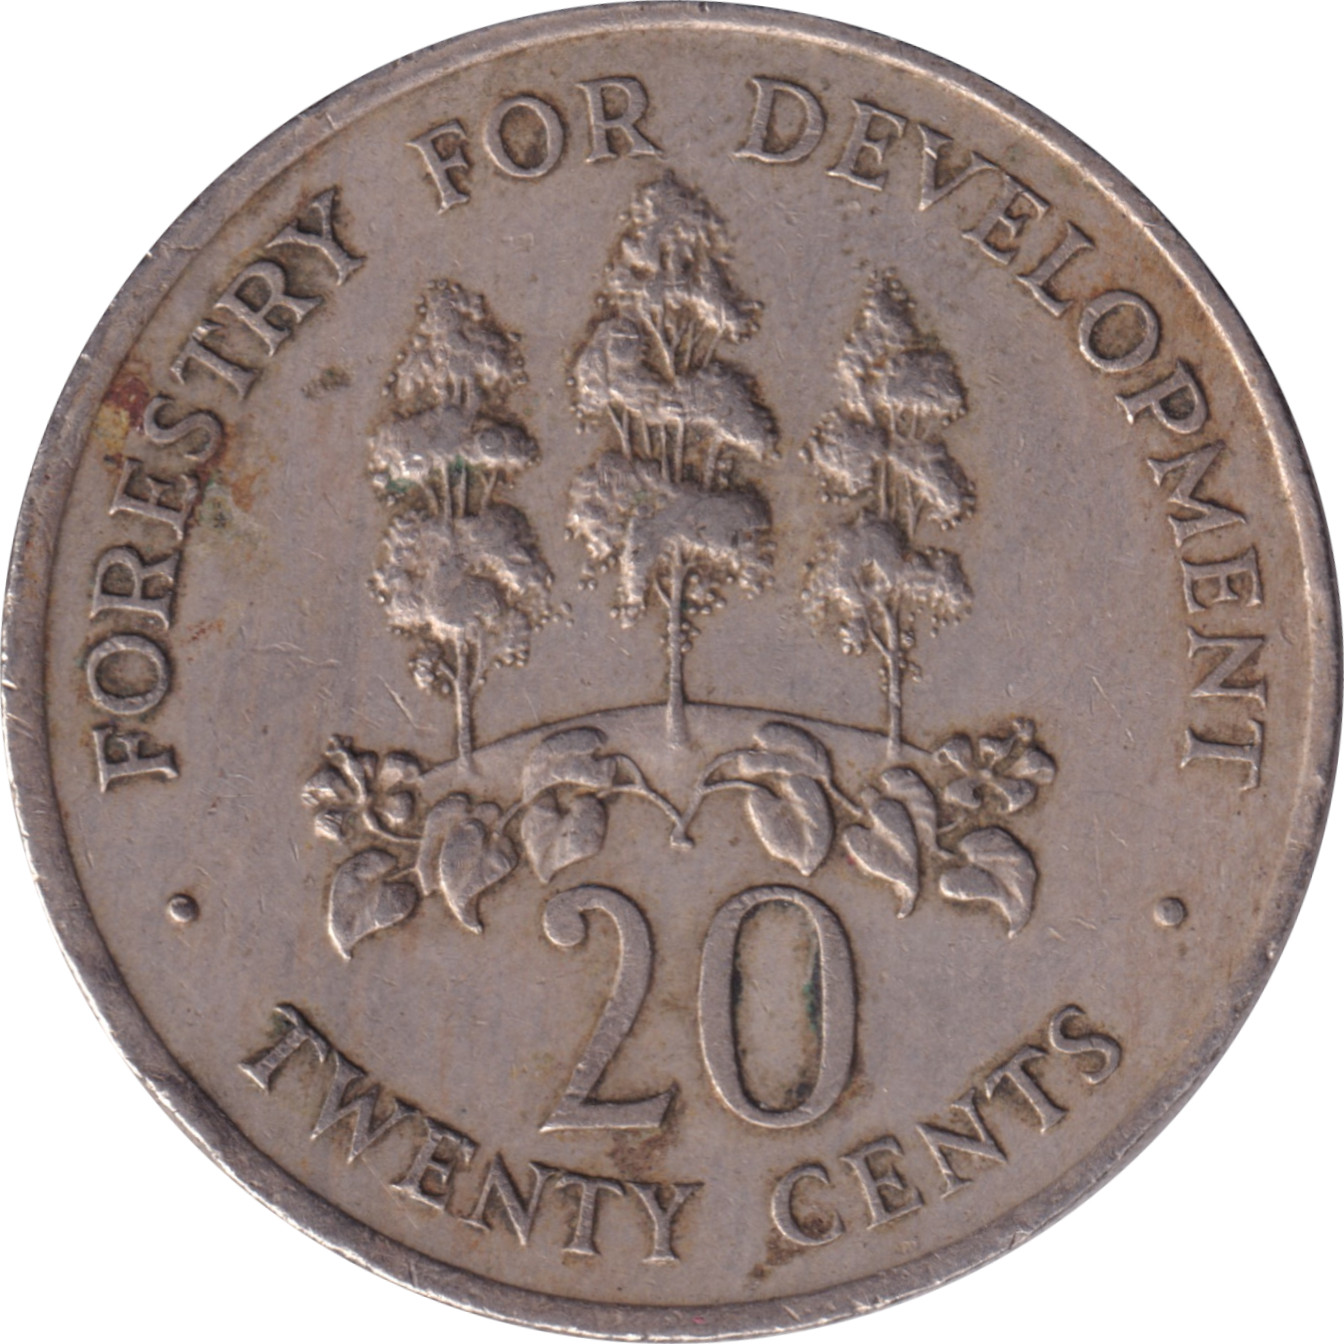 20 cents - Arbres - Forestry